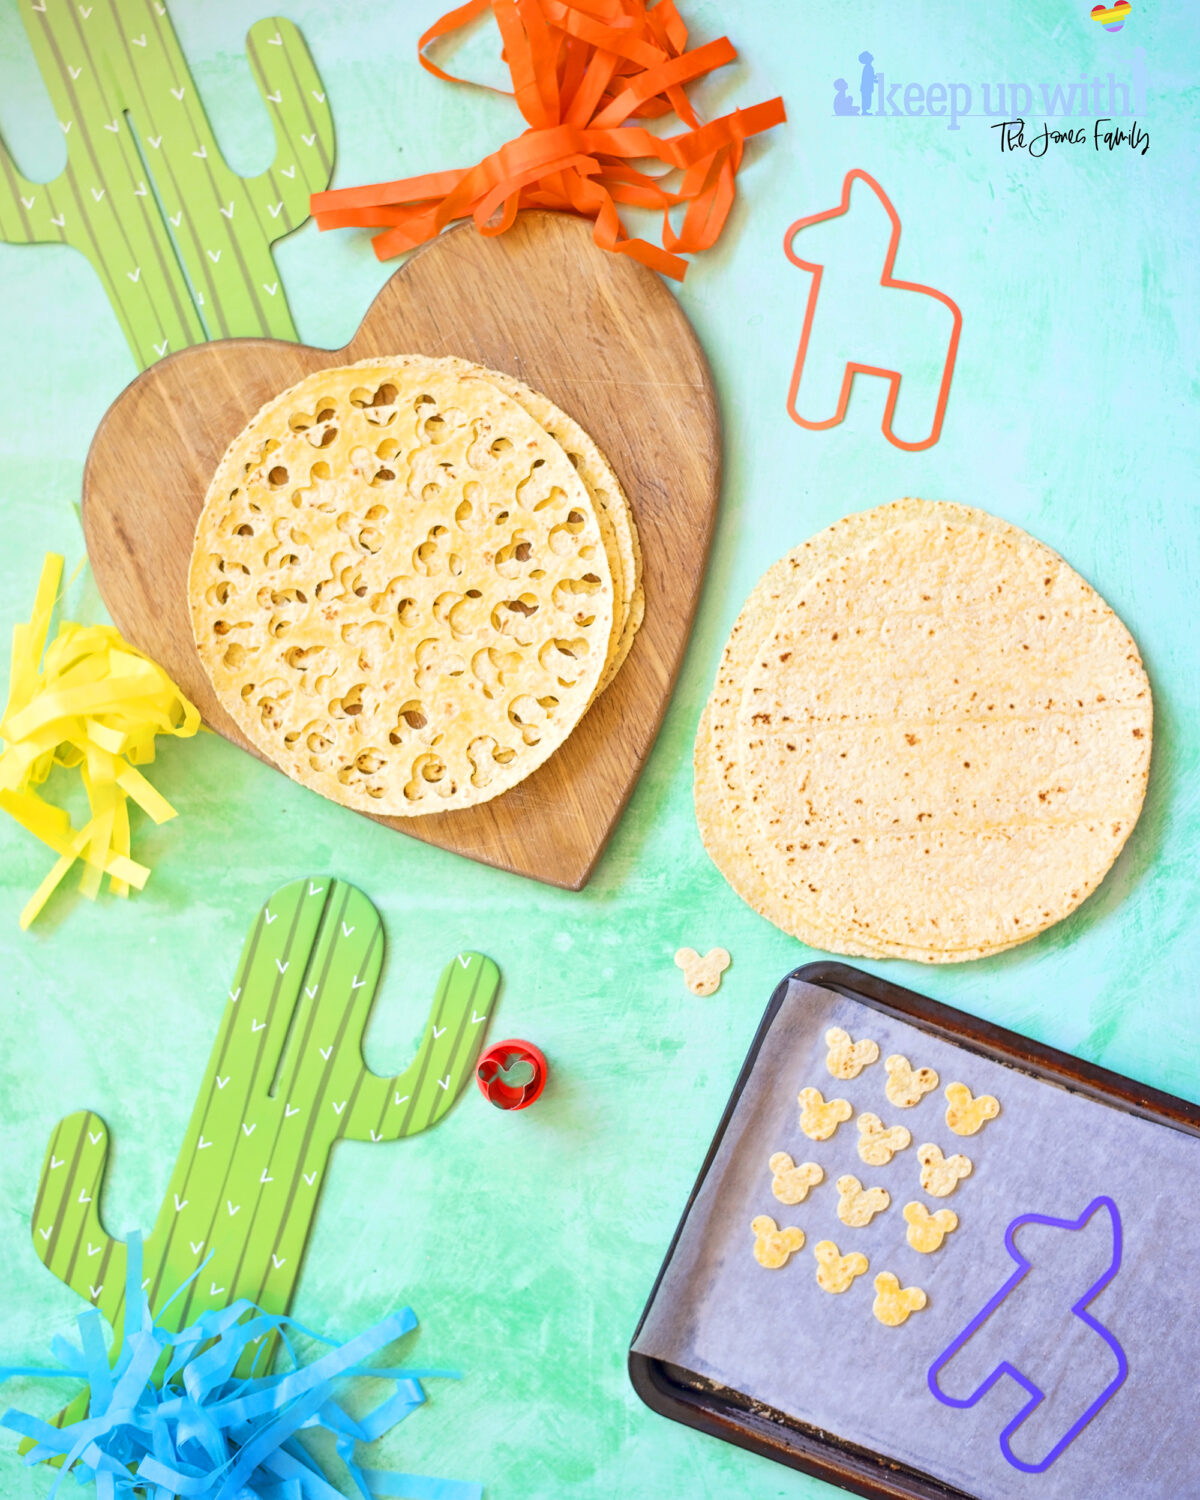 Image shows the recipe for Mickey Mouse taco chips. There is a baking tray with small cut out tortilla chips in the shape of Mickey Mouse's head. There is a metal Mickey Mouse cookie cutter and decorations for cinco de mayo, disney style.  There is a cardboard cactus and some tassles in bright colours on a sea green background.  Keep Up with the Jones Family.